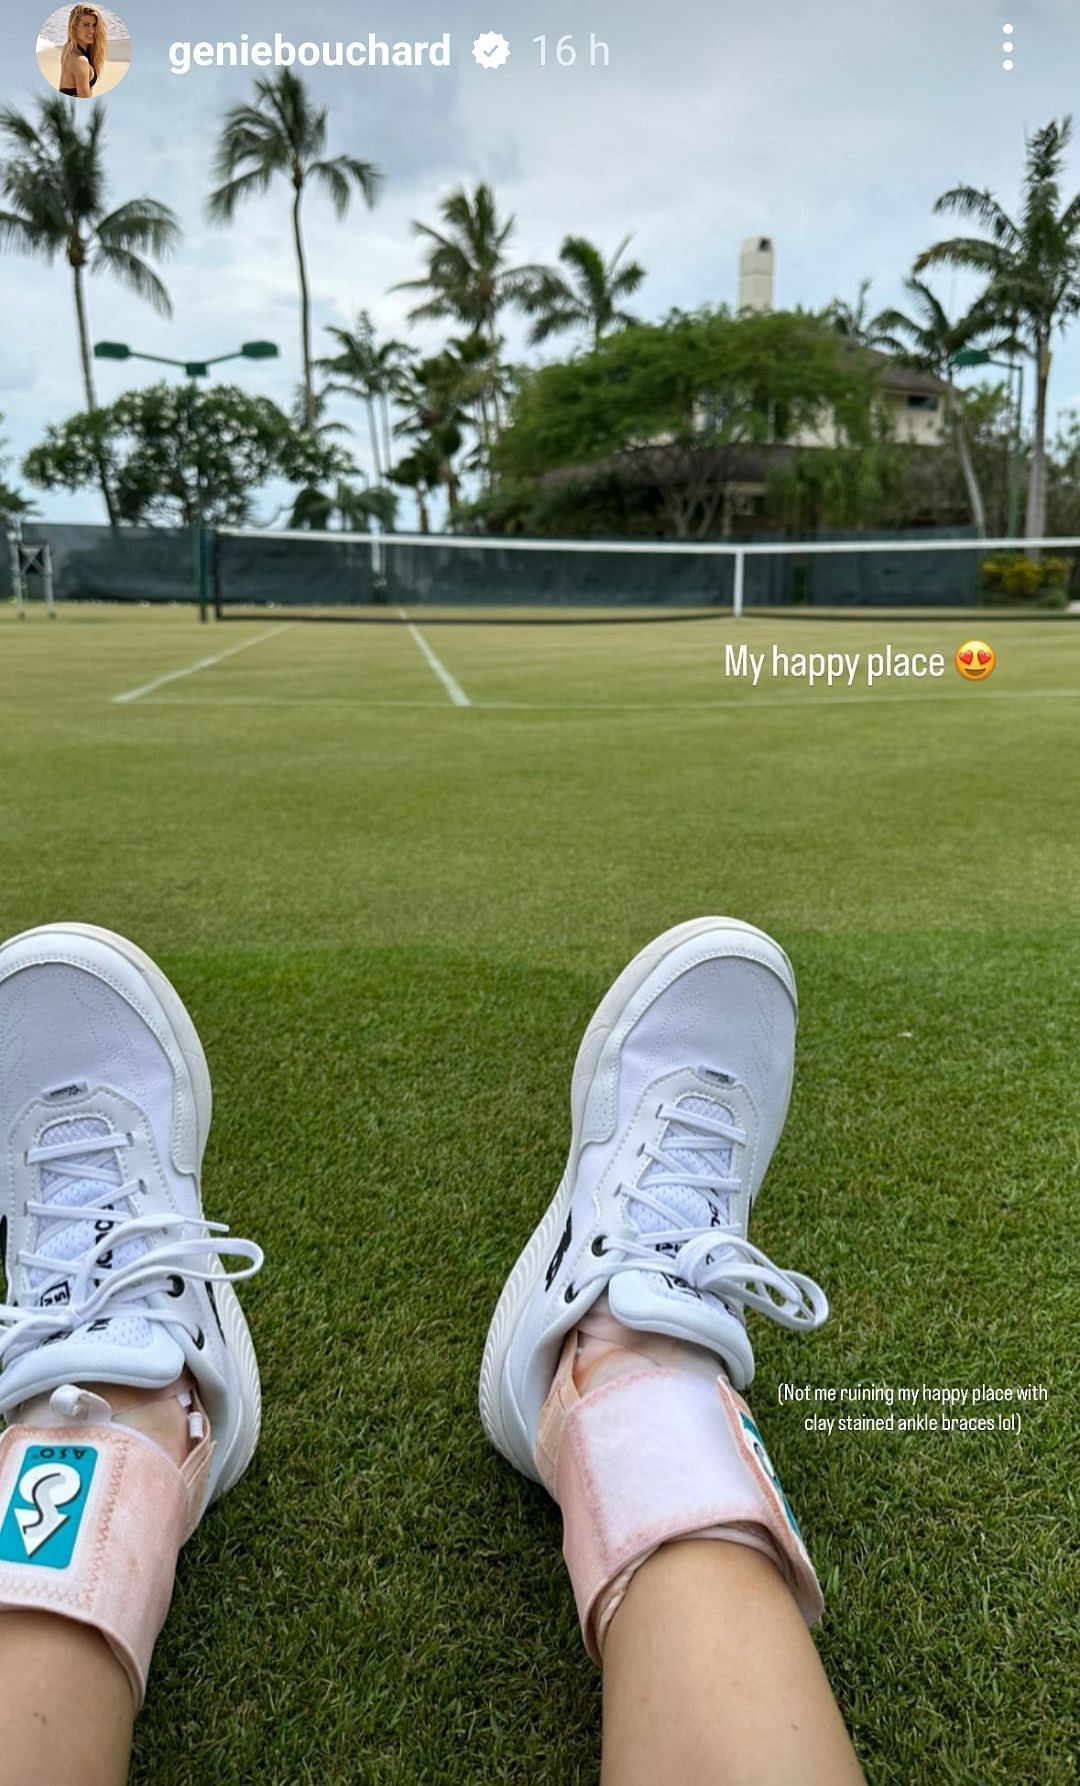 Eugenie Bouchard rejoicing her time on the grass courts